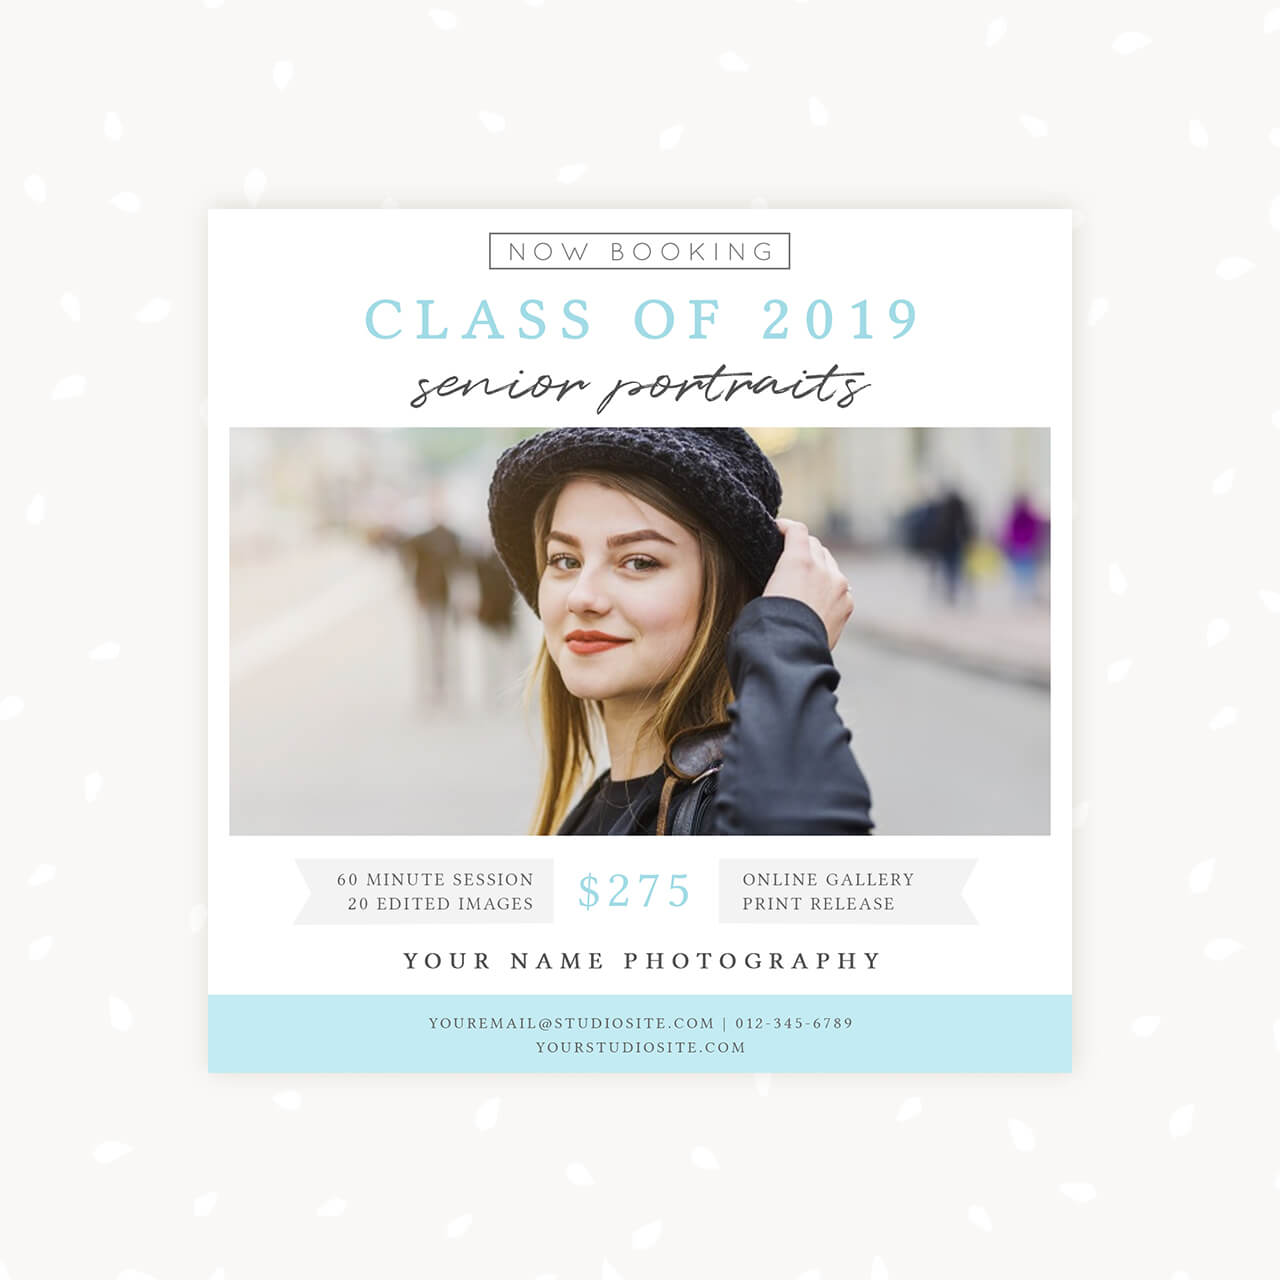 Booking Senior Sessions Template